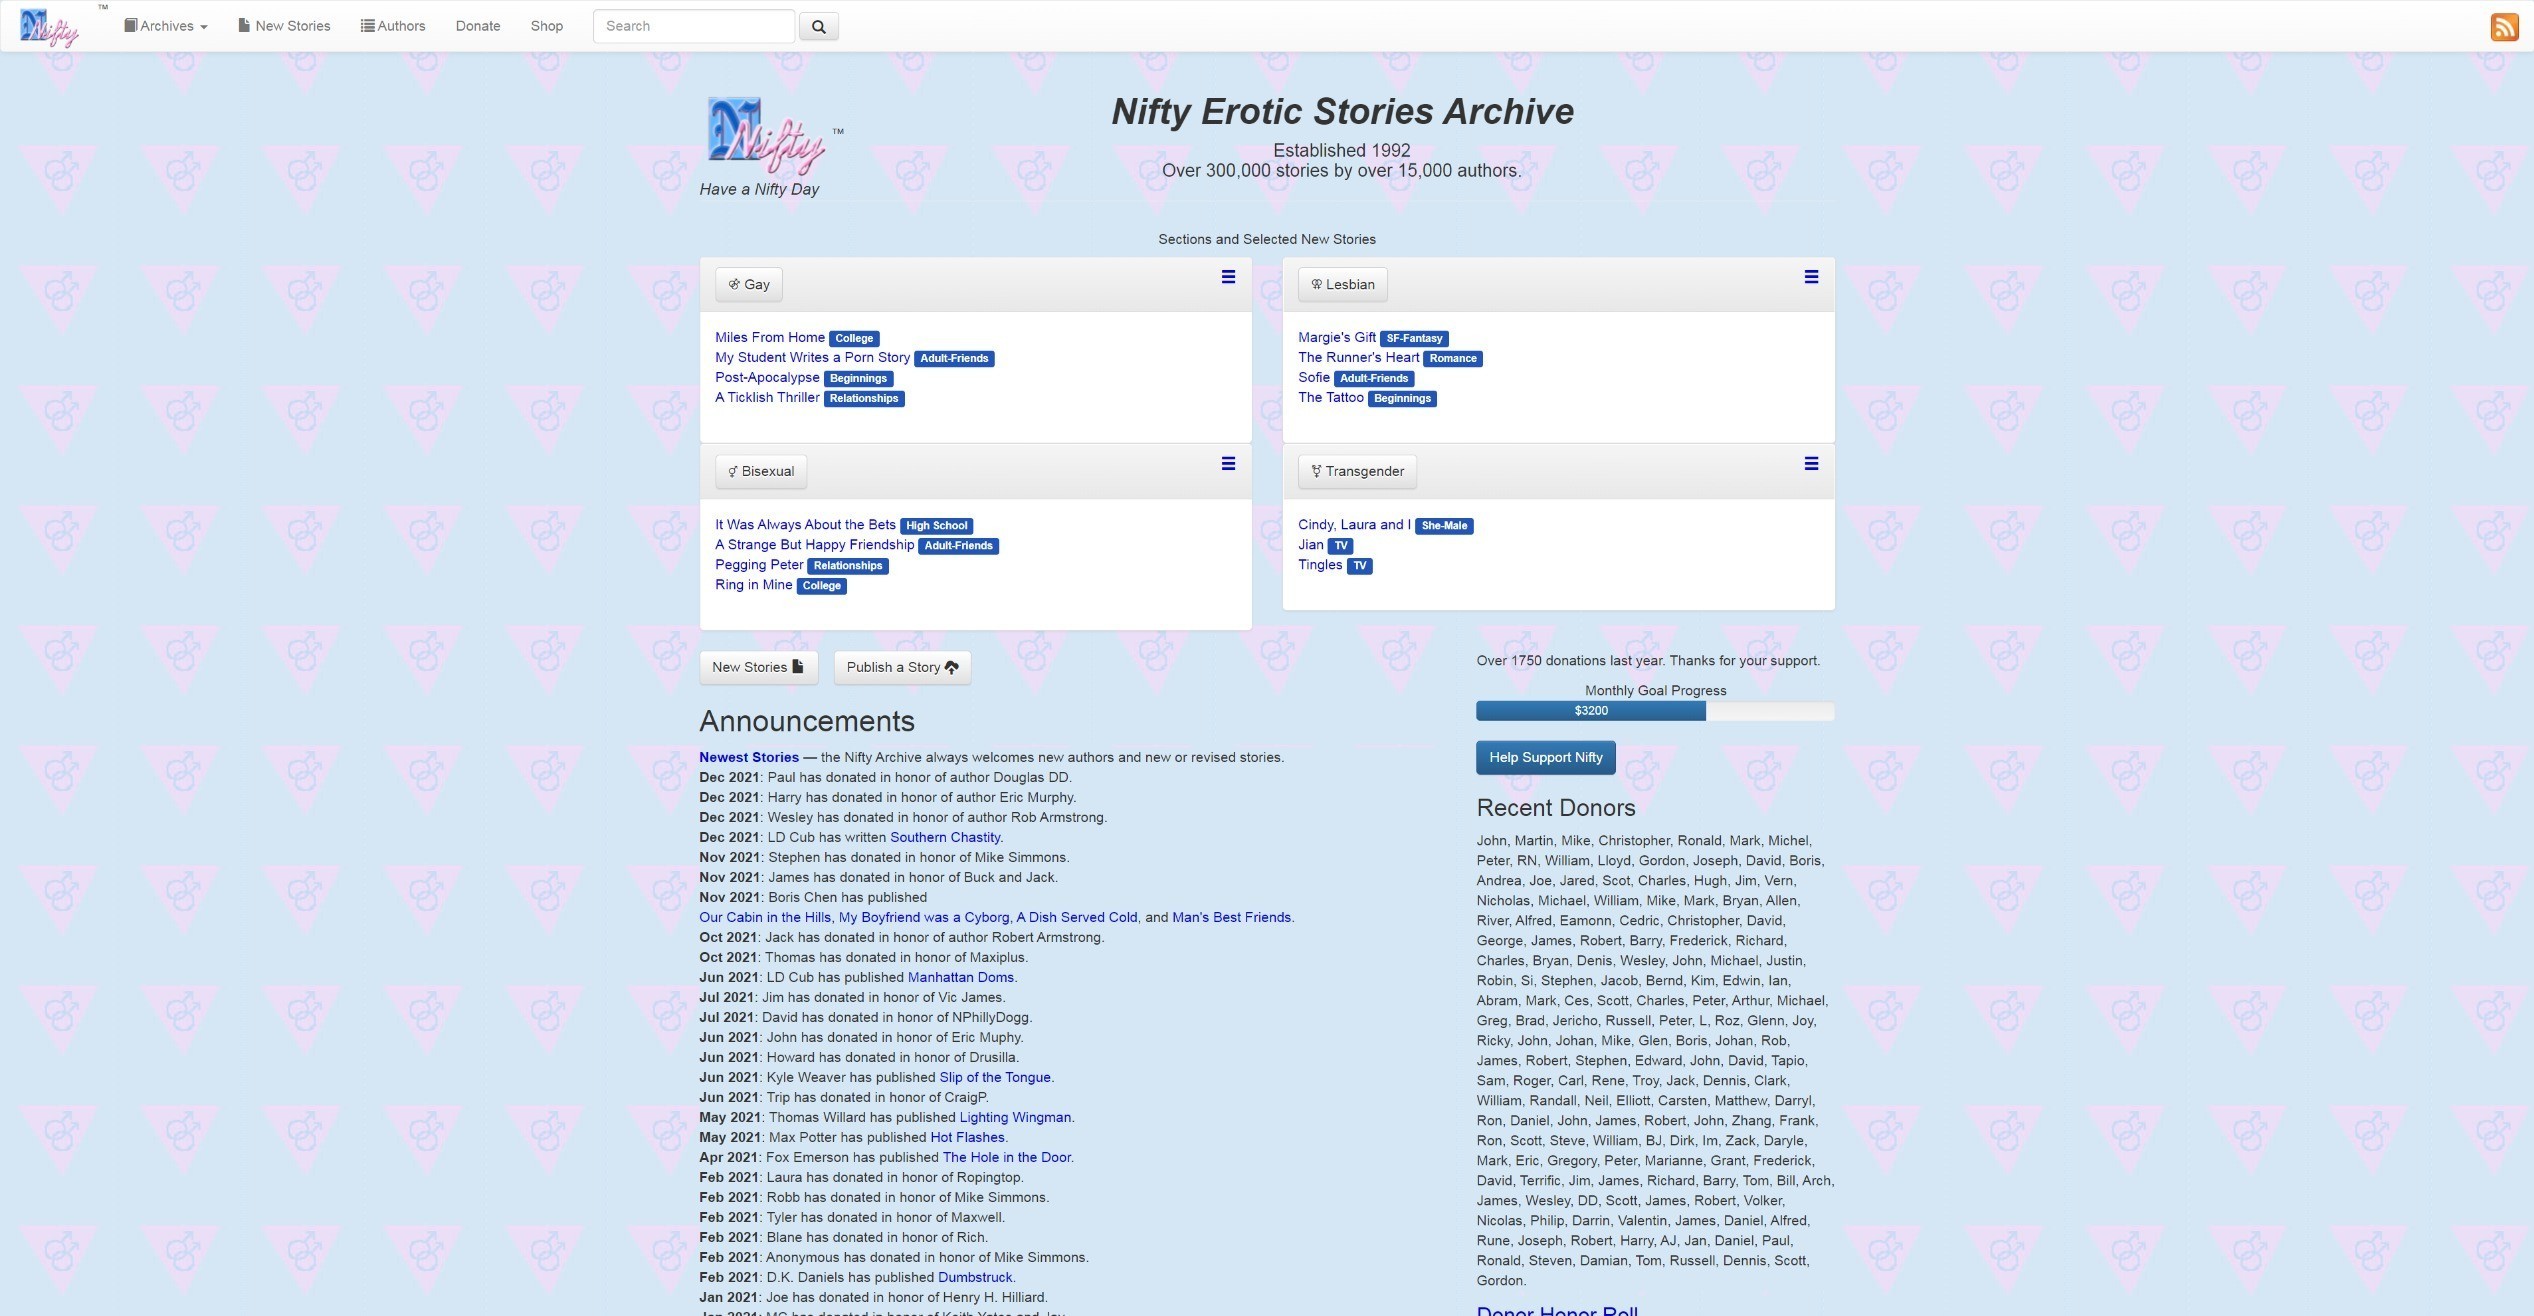 Nifty Erotic Archives